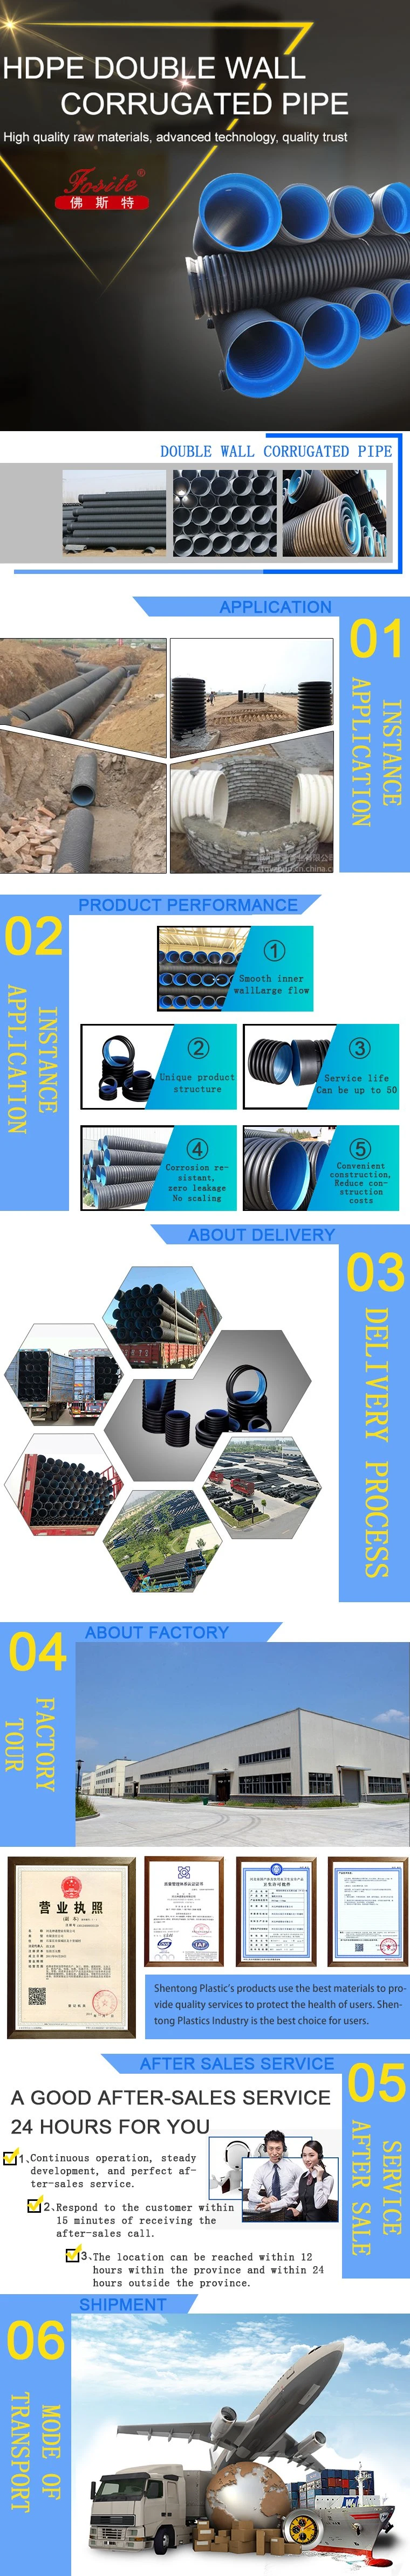 High Quality Polyethylene HDPE Double Wall Corrugated (DWC) Sewage Spiral Pipe for Drainage